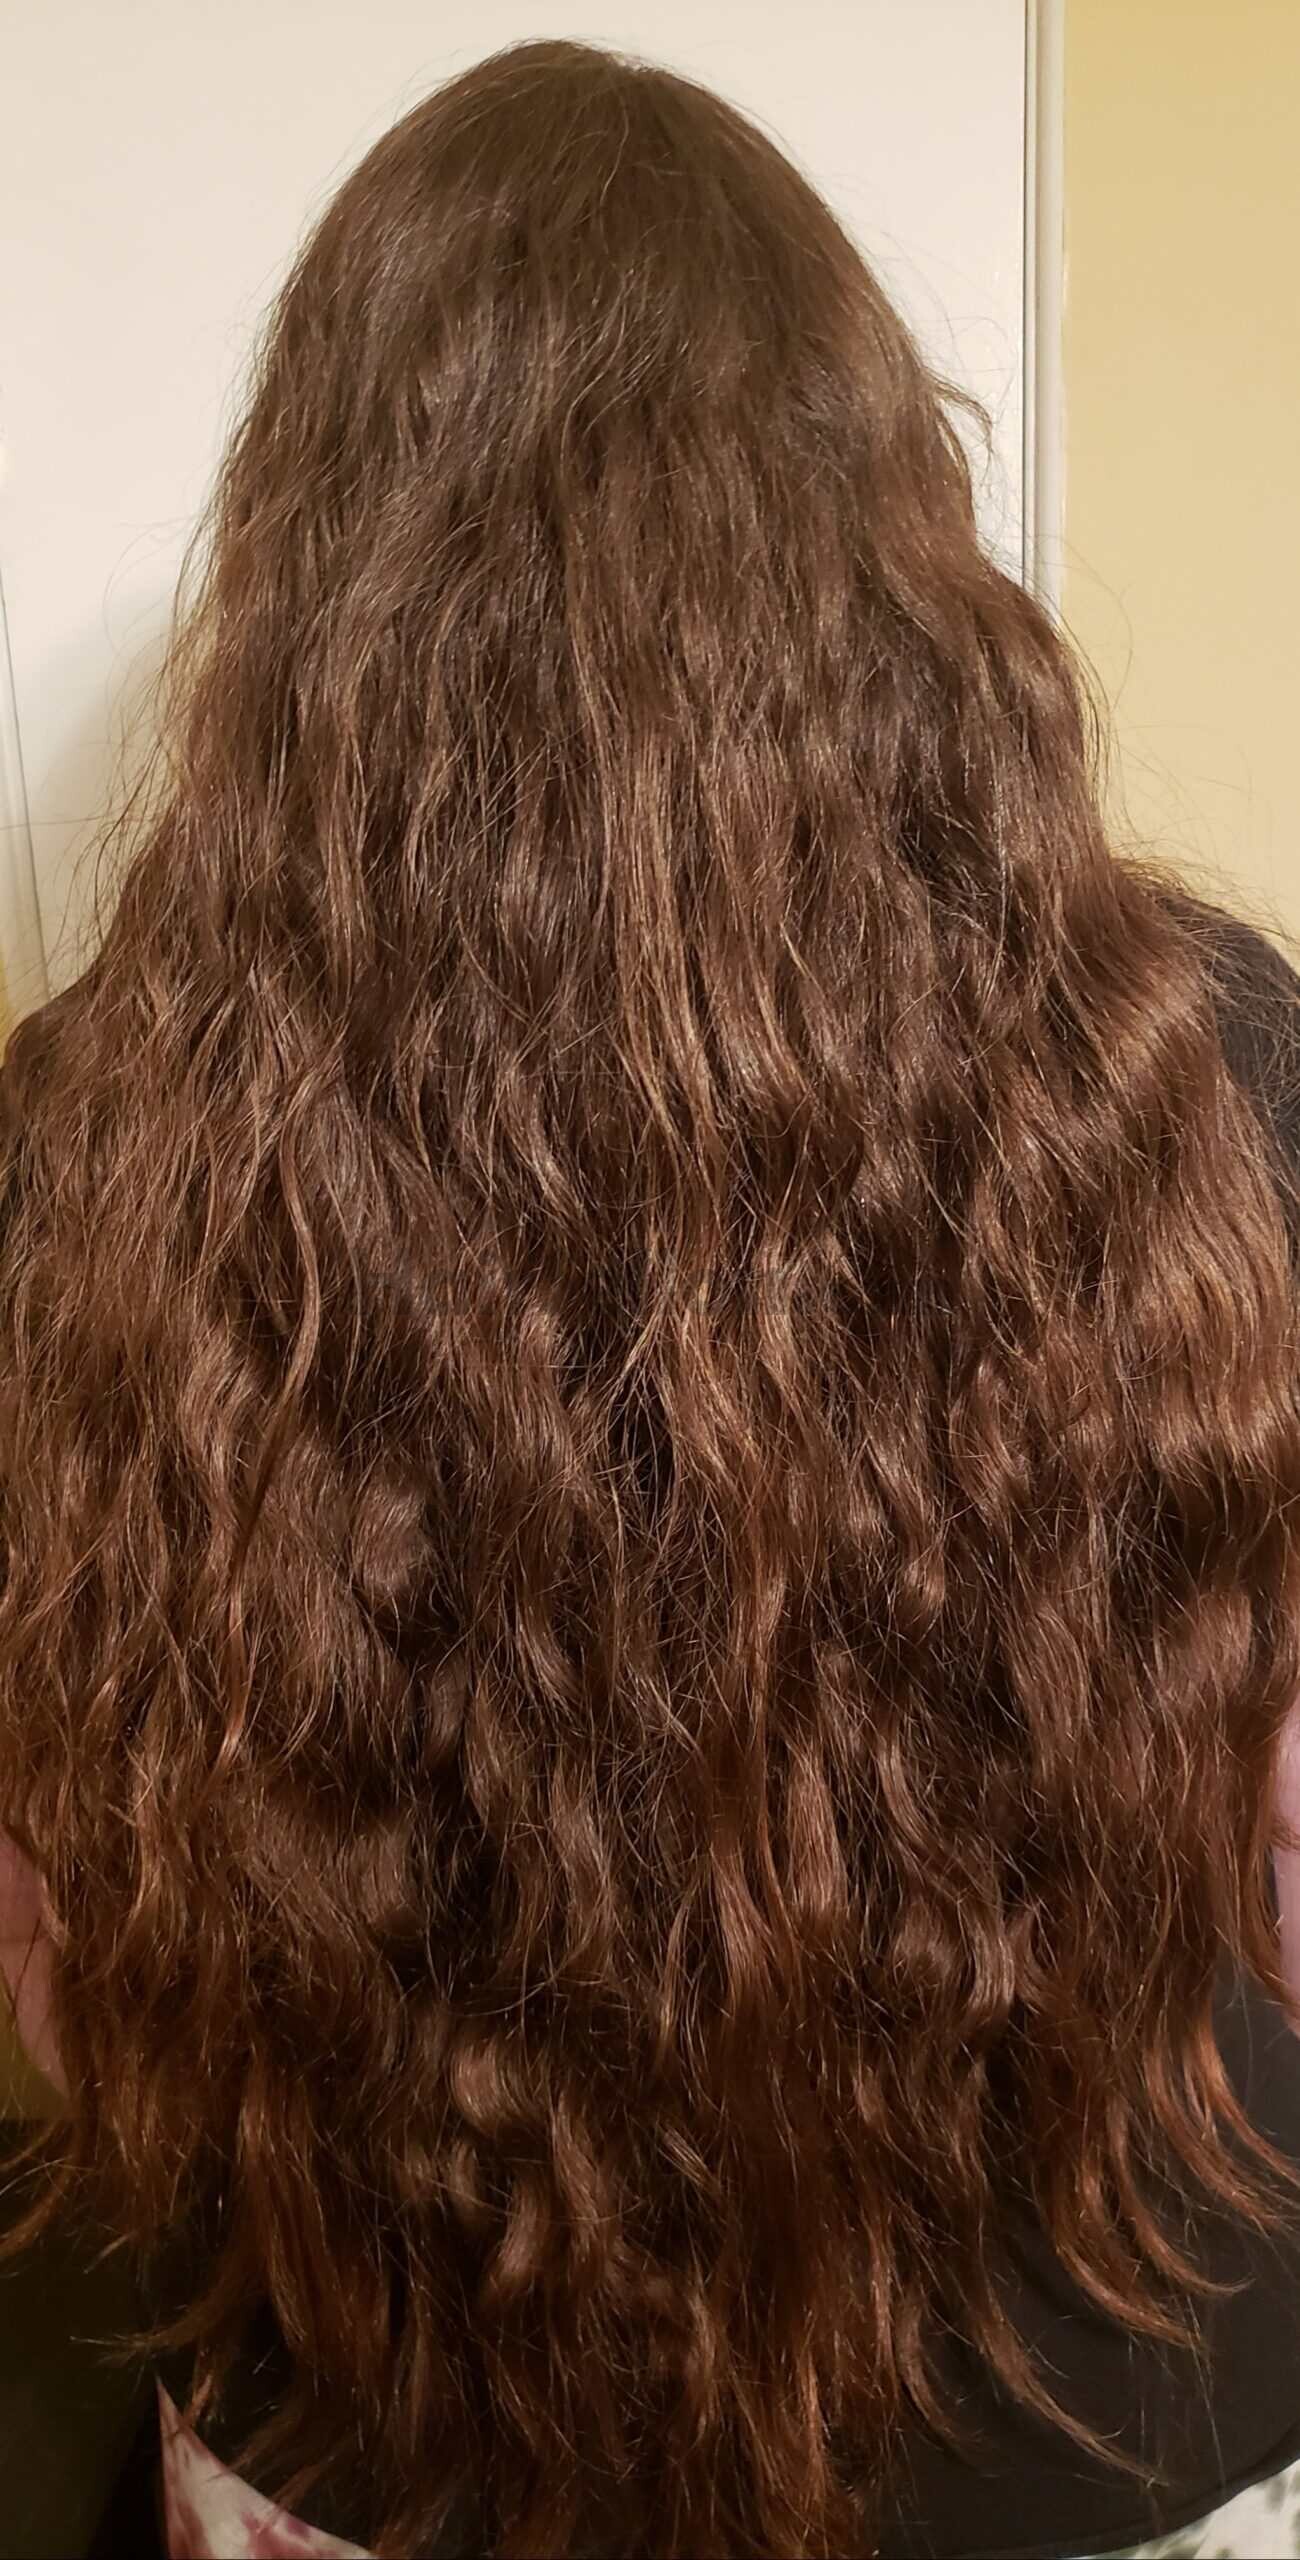 Compressed 2nd waves after braid